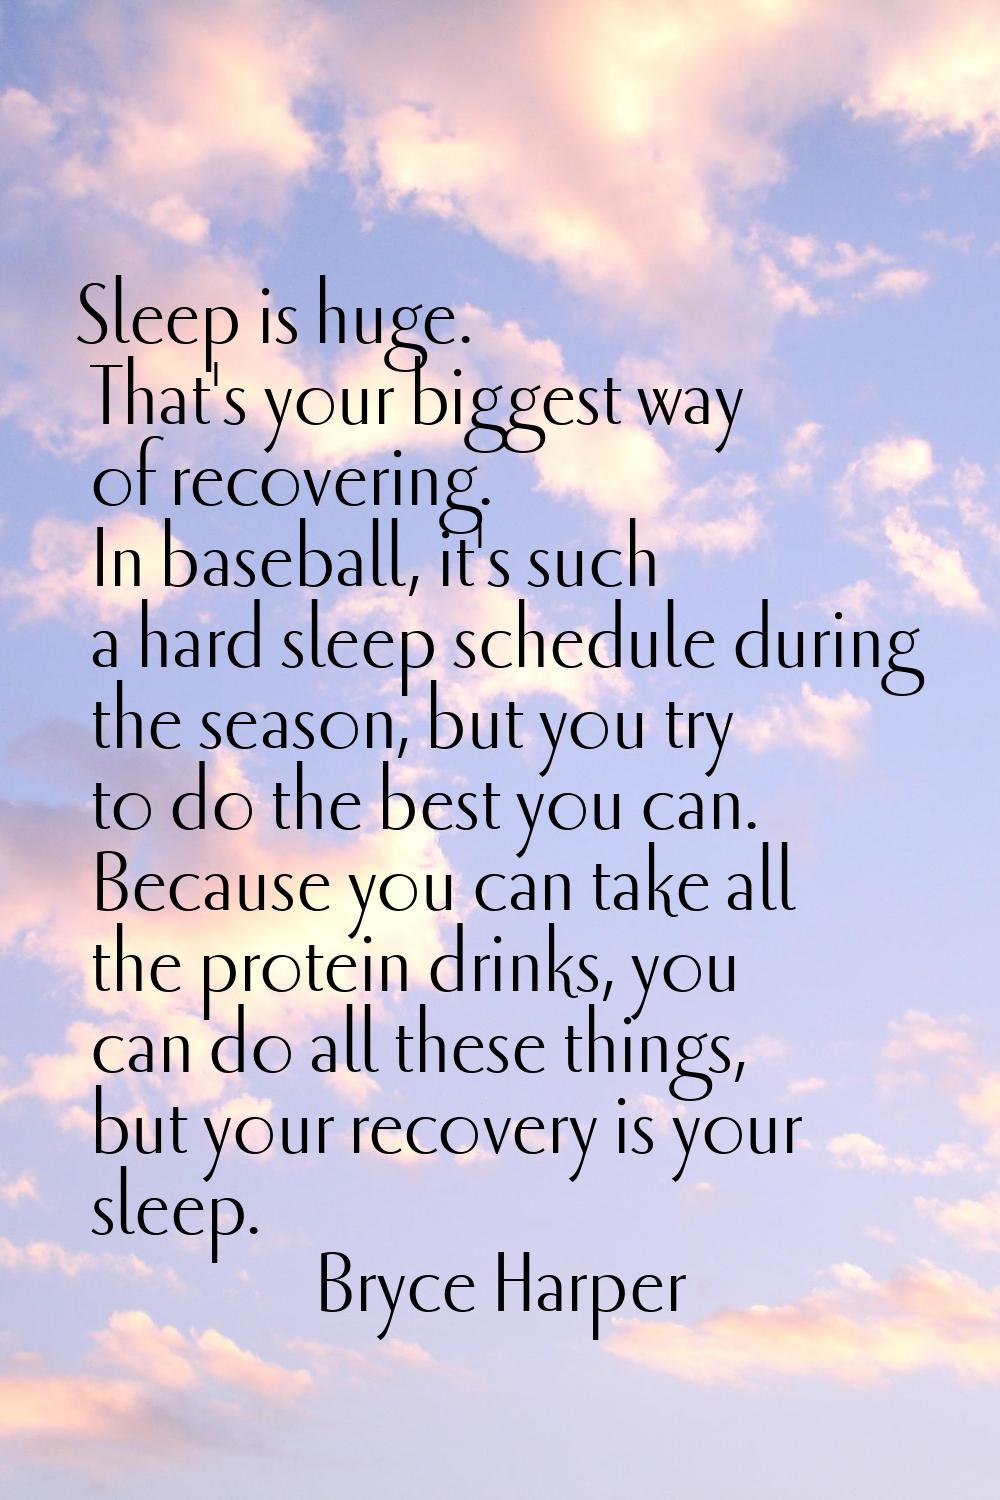 Sleep is huge. That's your biggest way of recovering. In baseball, it's such a hard sleep schedule 